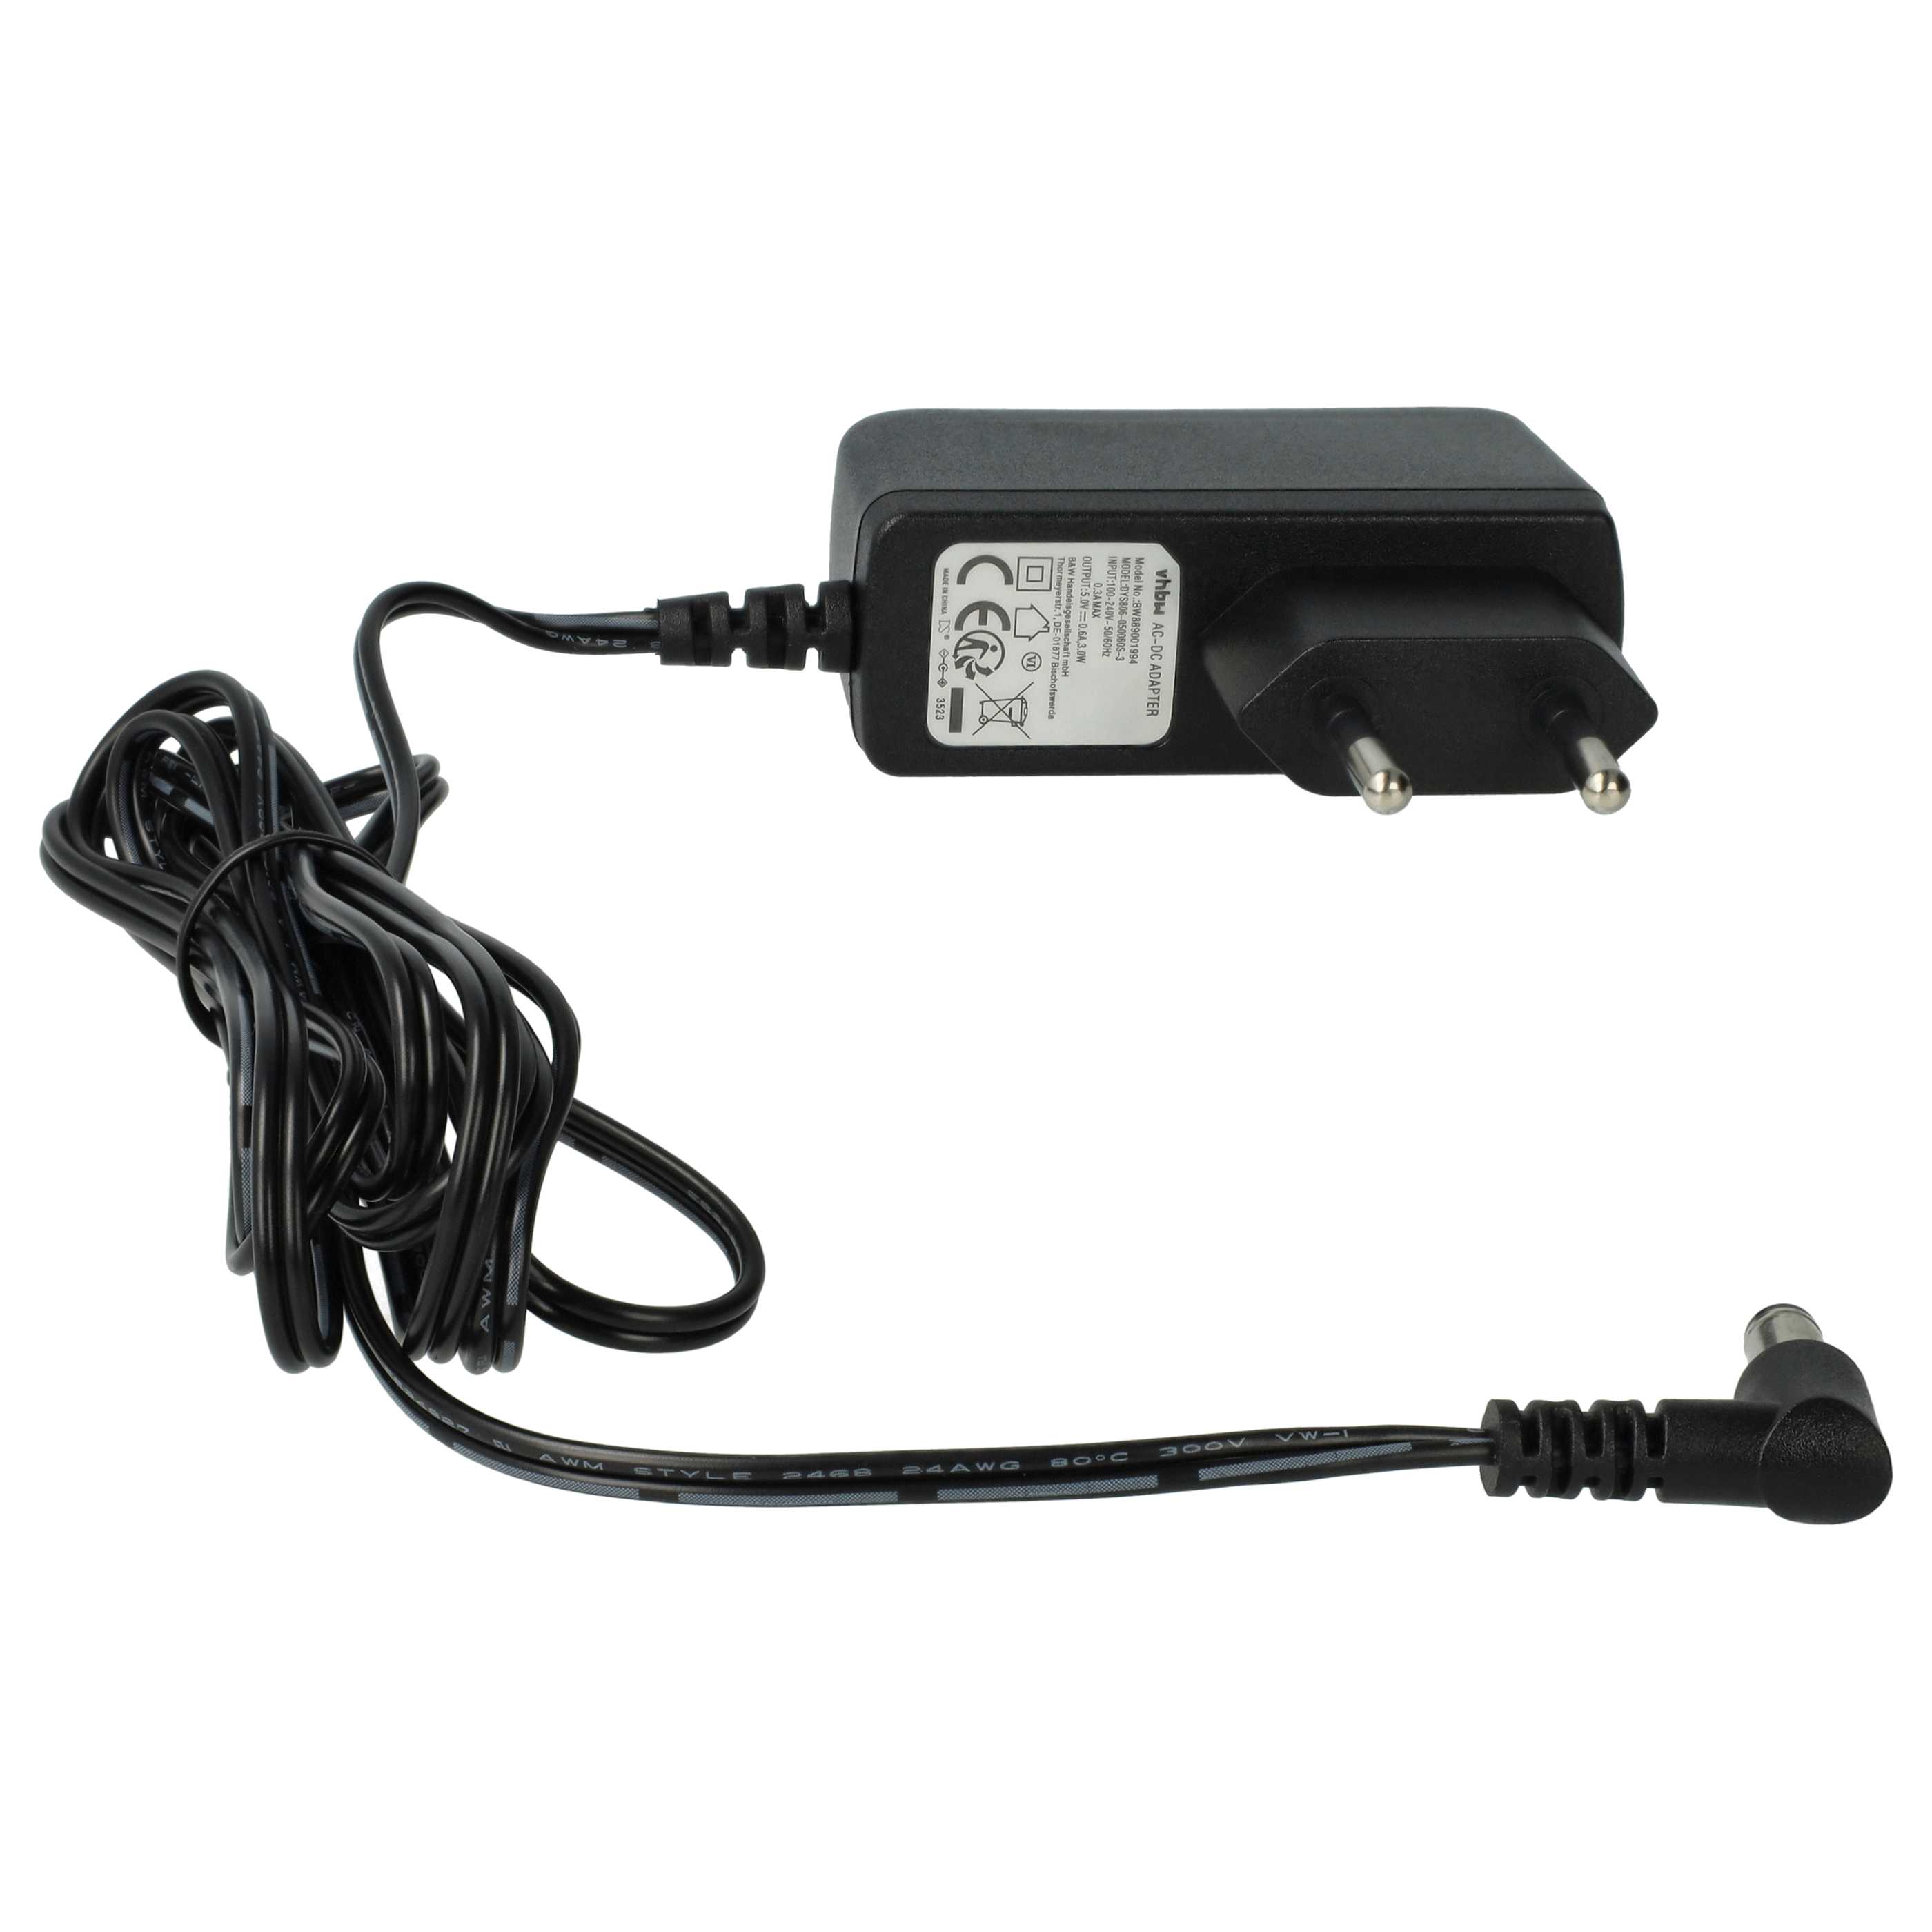 Mains Power Adapter replaces Fanvil PSU-506 for Yealink Landline Telephone, Home Telephone etc.